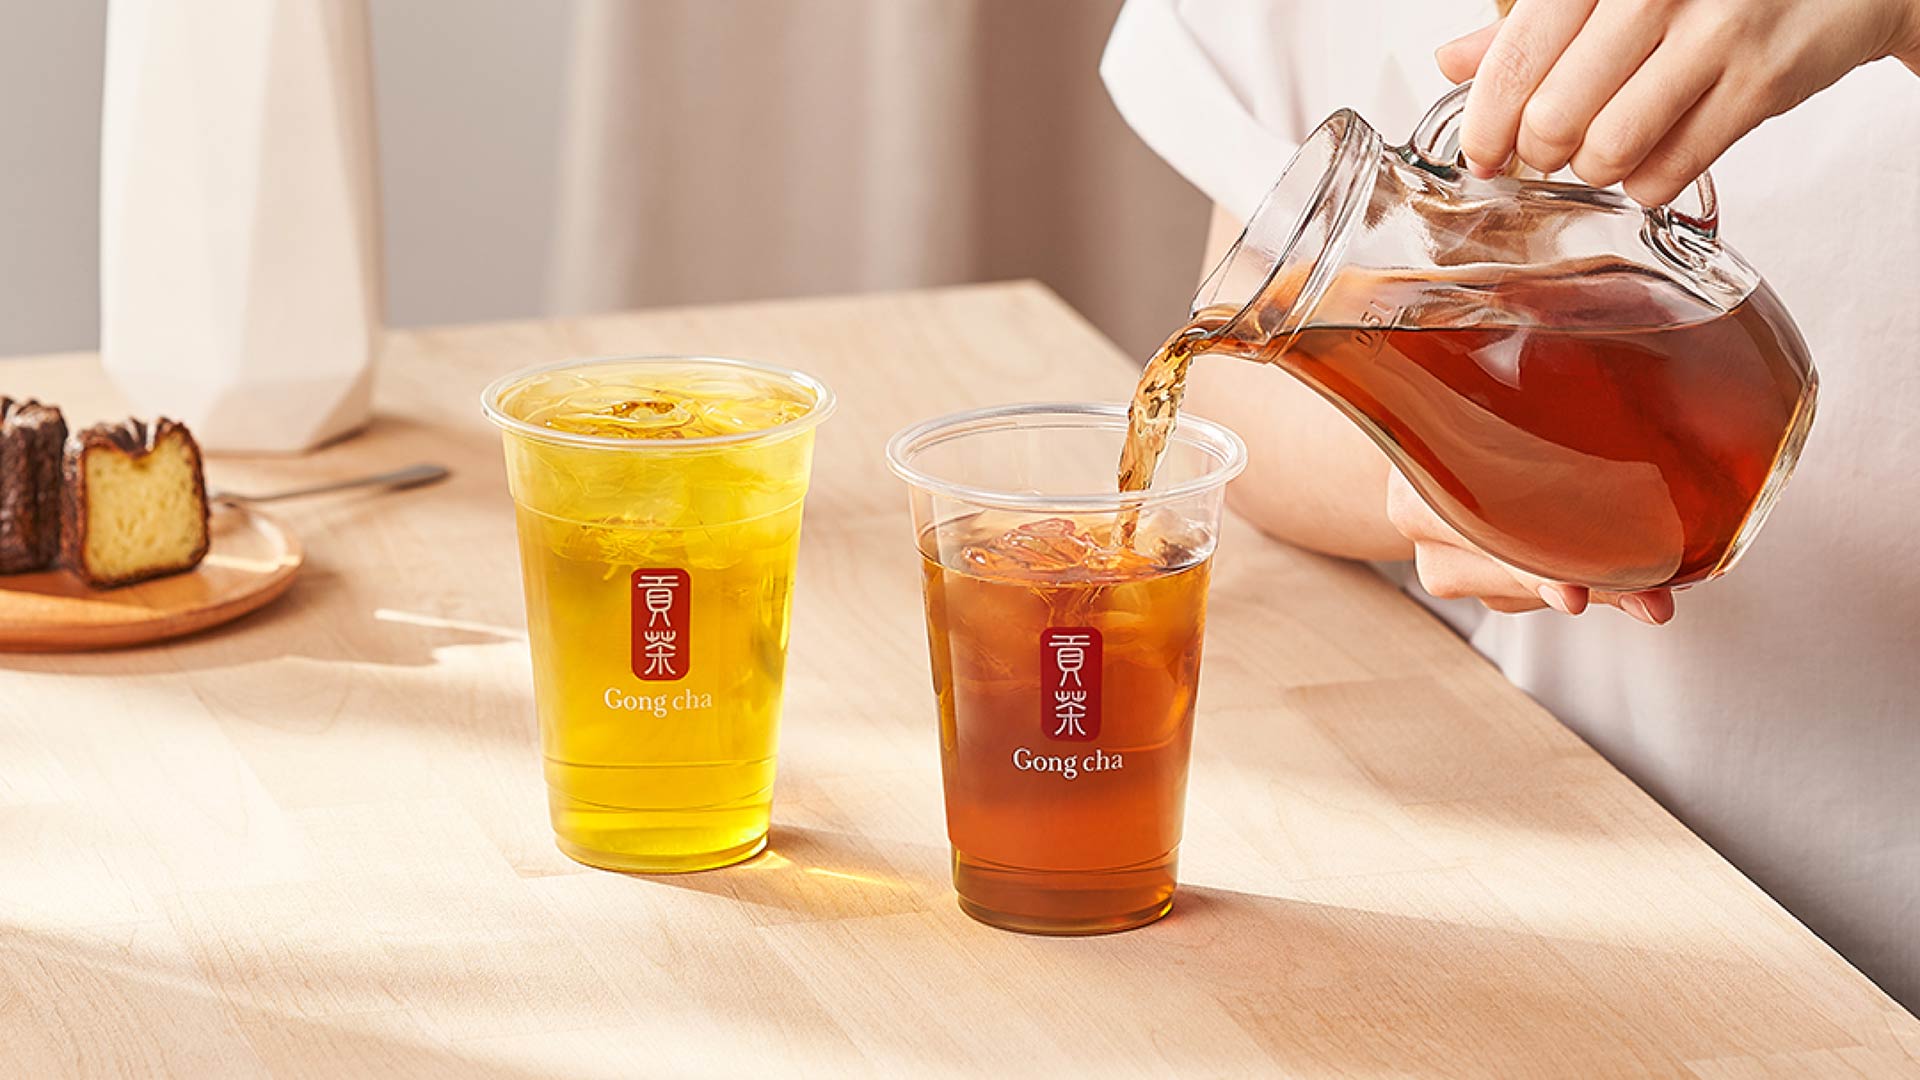 Pouring Gong cha brewed tea drinks